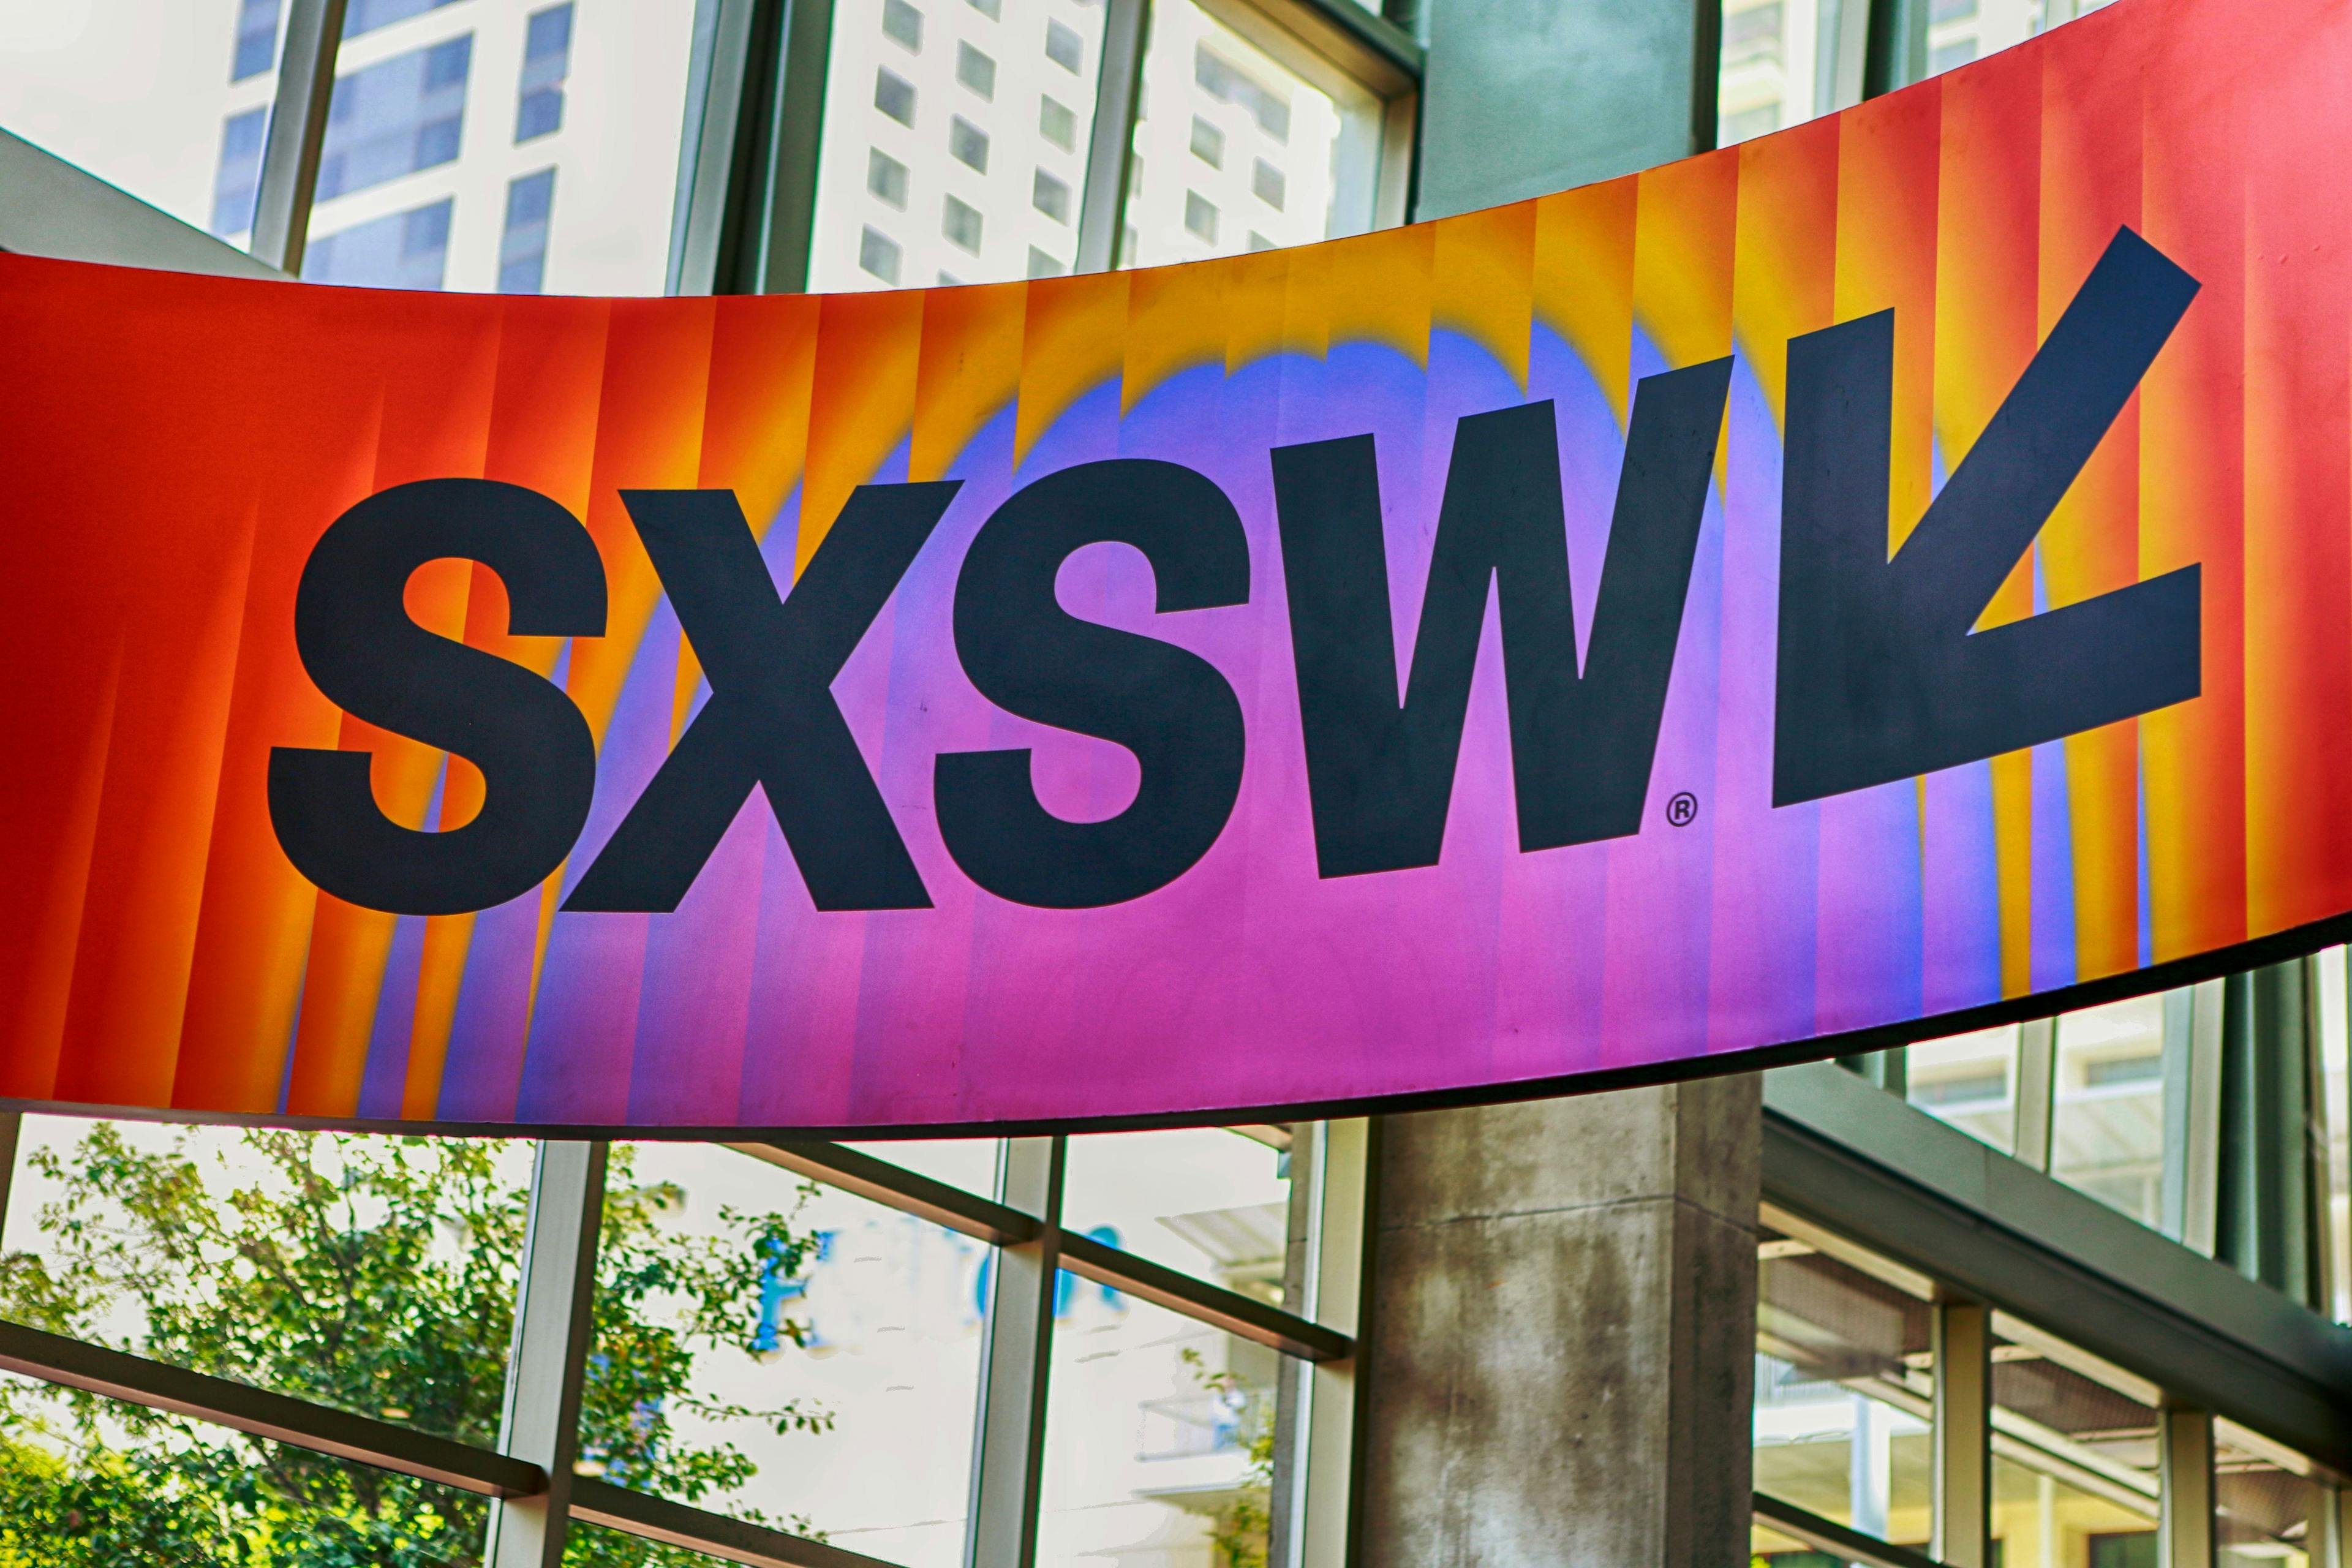 SXSW: South by Southwest Music Festival - famous music festivals in the world RatePunk